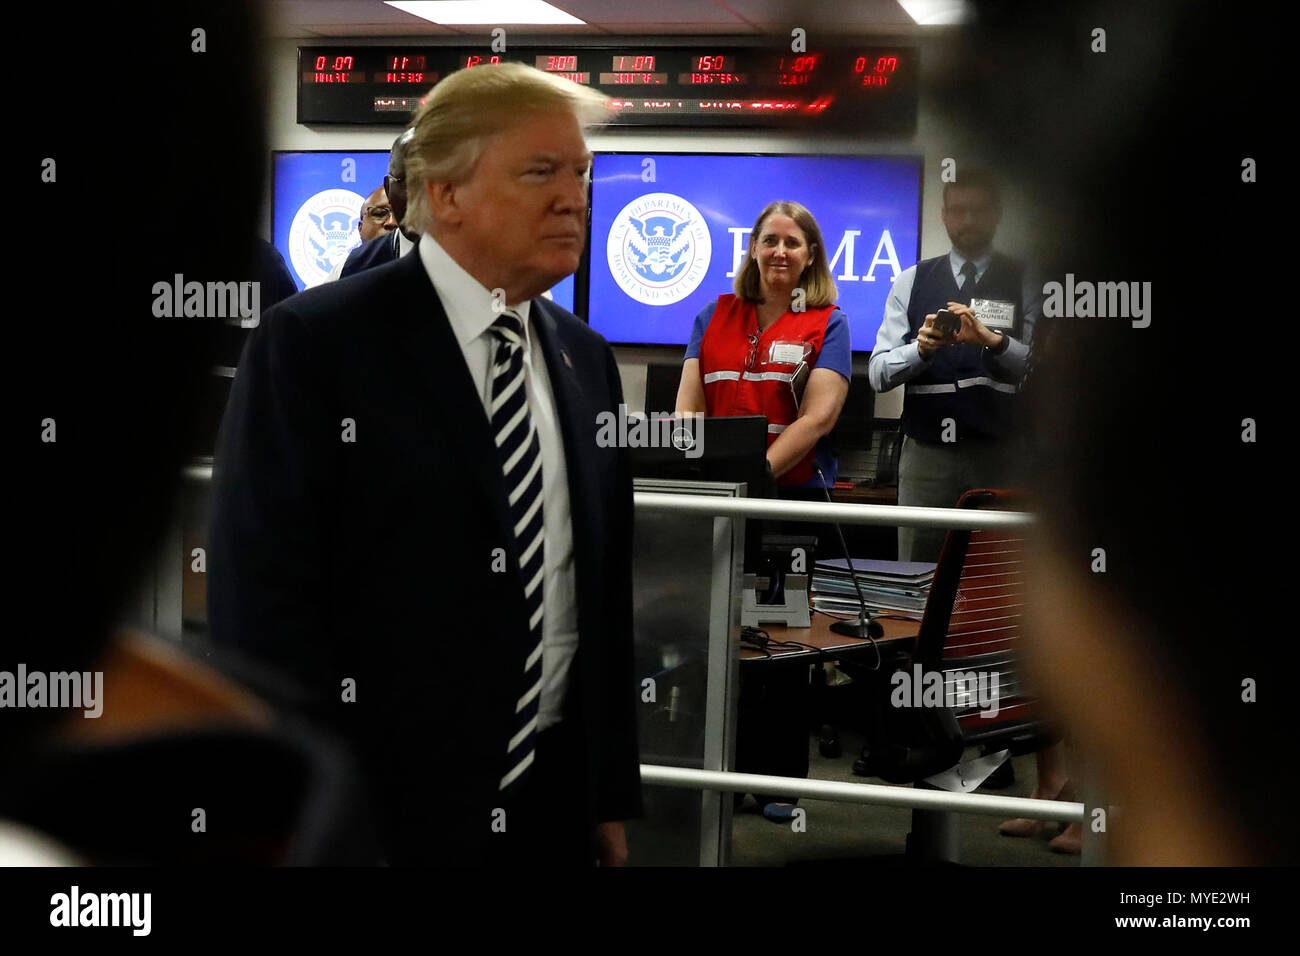 Washington, DC. 6th June, 2018. United States President Donald J. Trump greets employees at the National Response Coordination Center at the Federal Emergency Management Agency Headquarters on June 6, 2018 in Washington, DC. Credit: Yuri Gripas/Pool via CNP | usage worldwide Credit: dpa/Alamy Live News Stock Photo